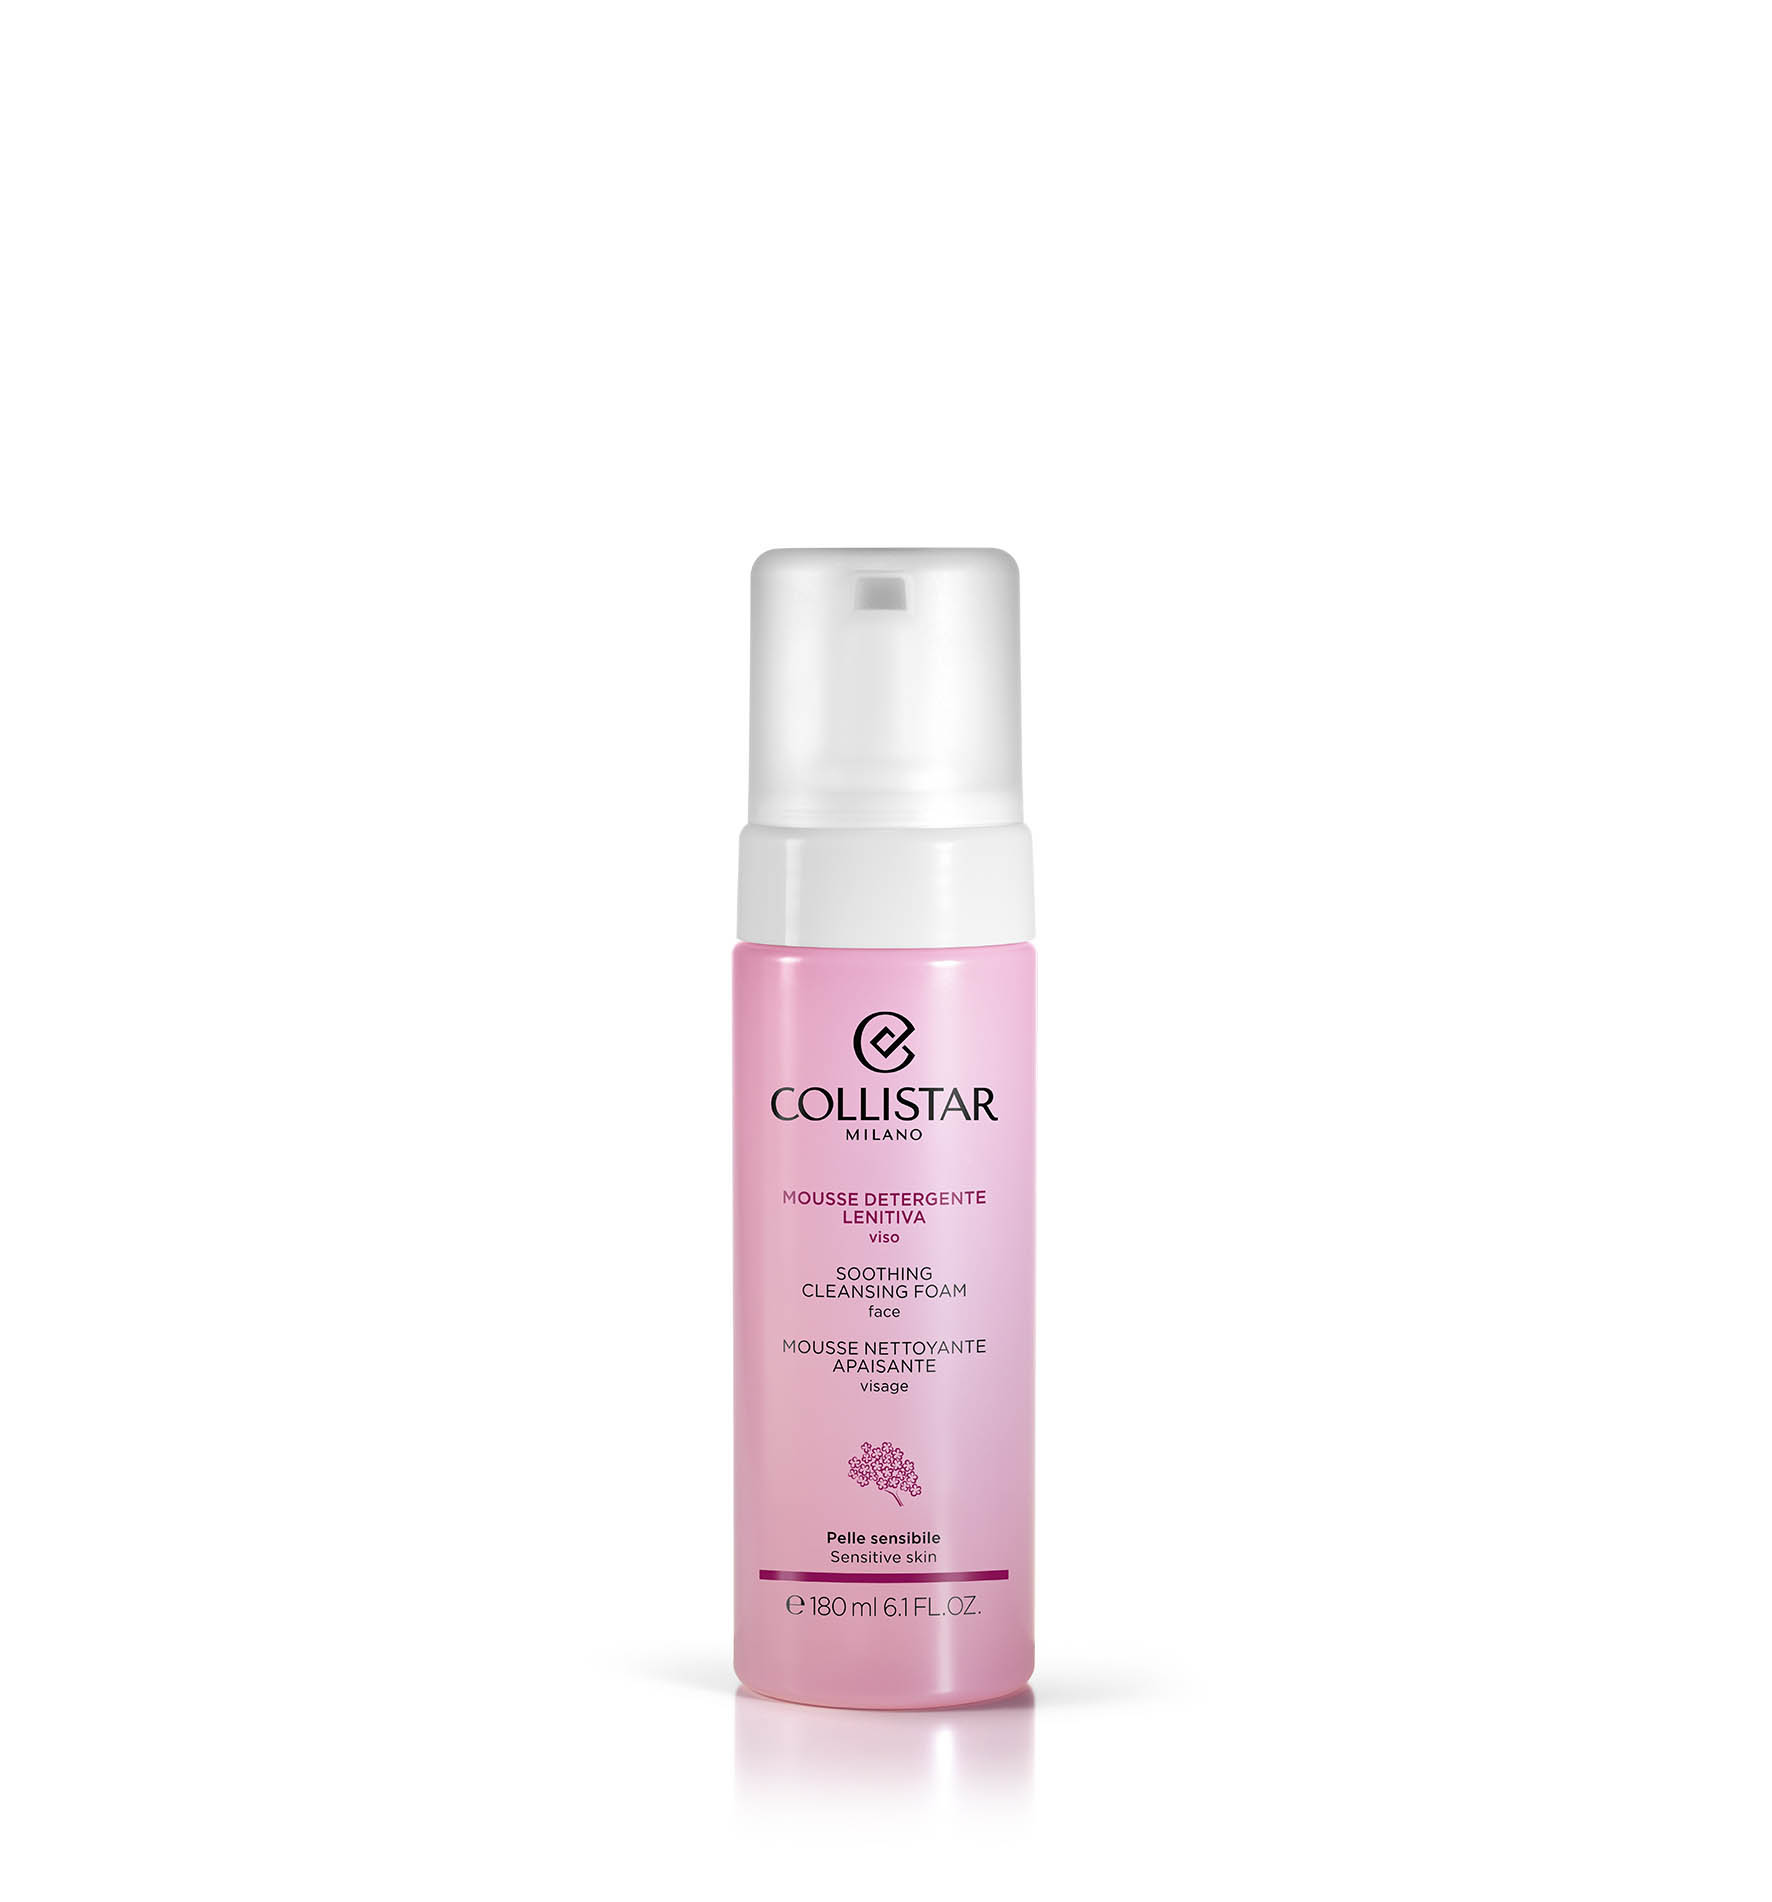 SOOTHING CLEANSING FOAM FACE - Dry skin | Collistar - Shop Online Ufficiale